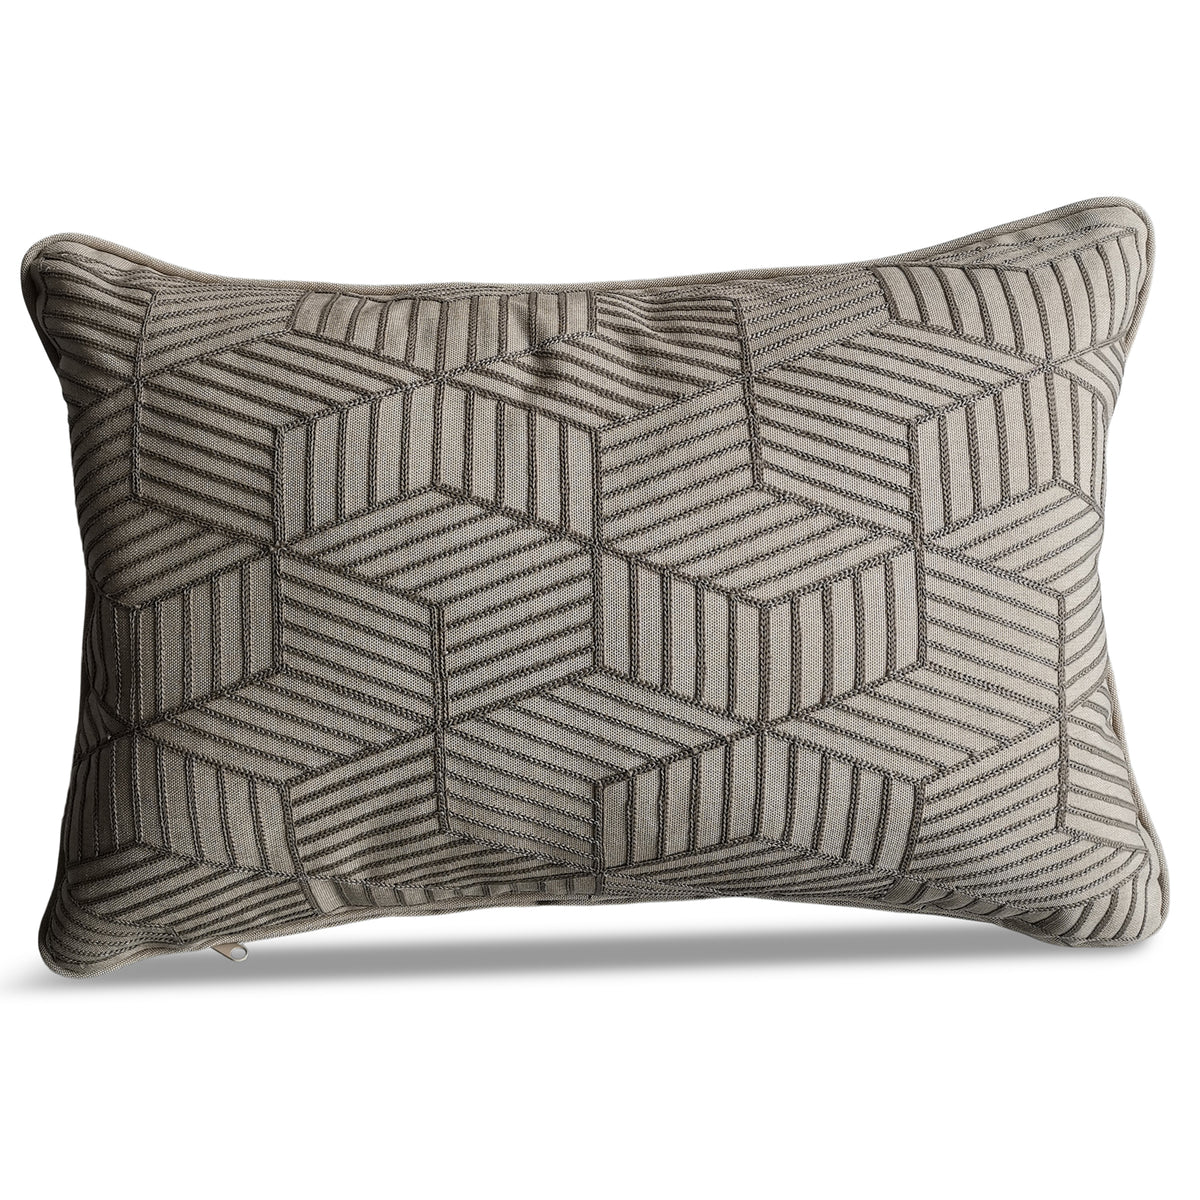 LG Outdoors Deluxe Embroidered Grey Striped Cubes 40cm x 60cm Rectangular Scatter Cushion